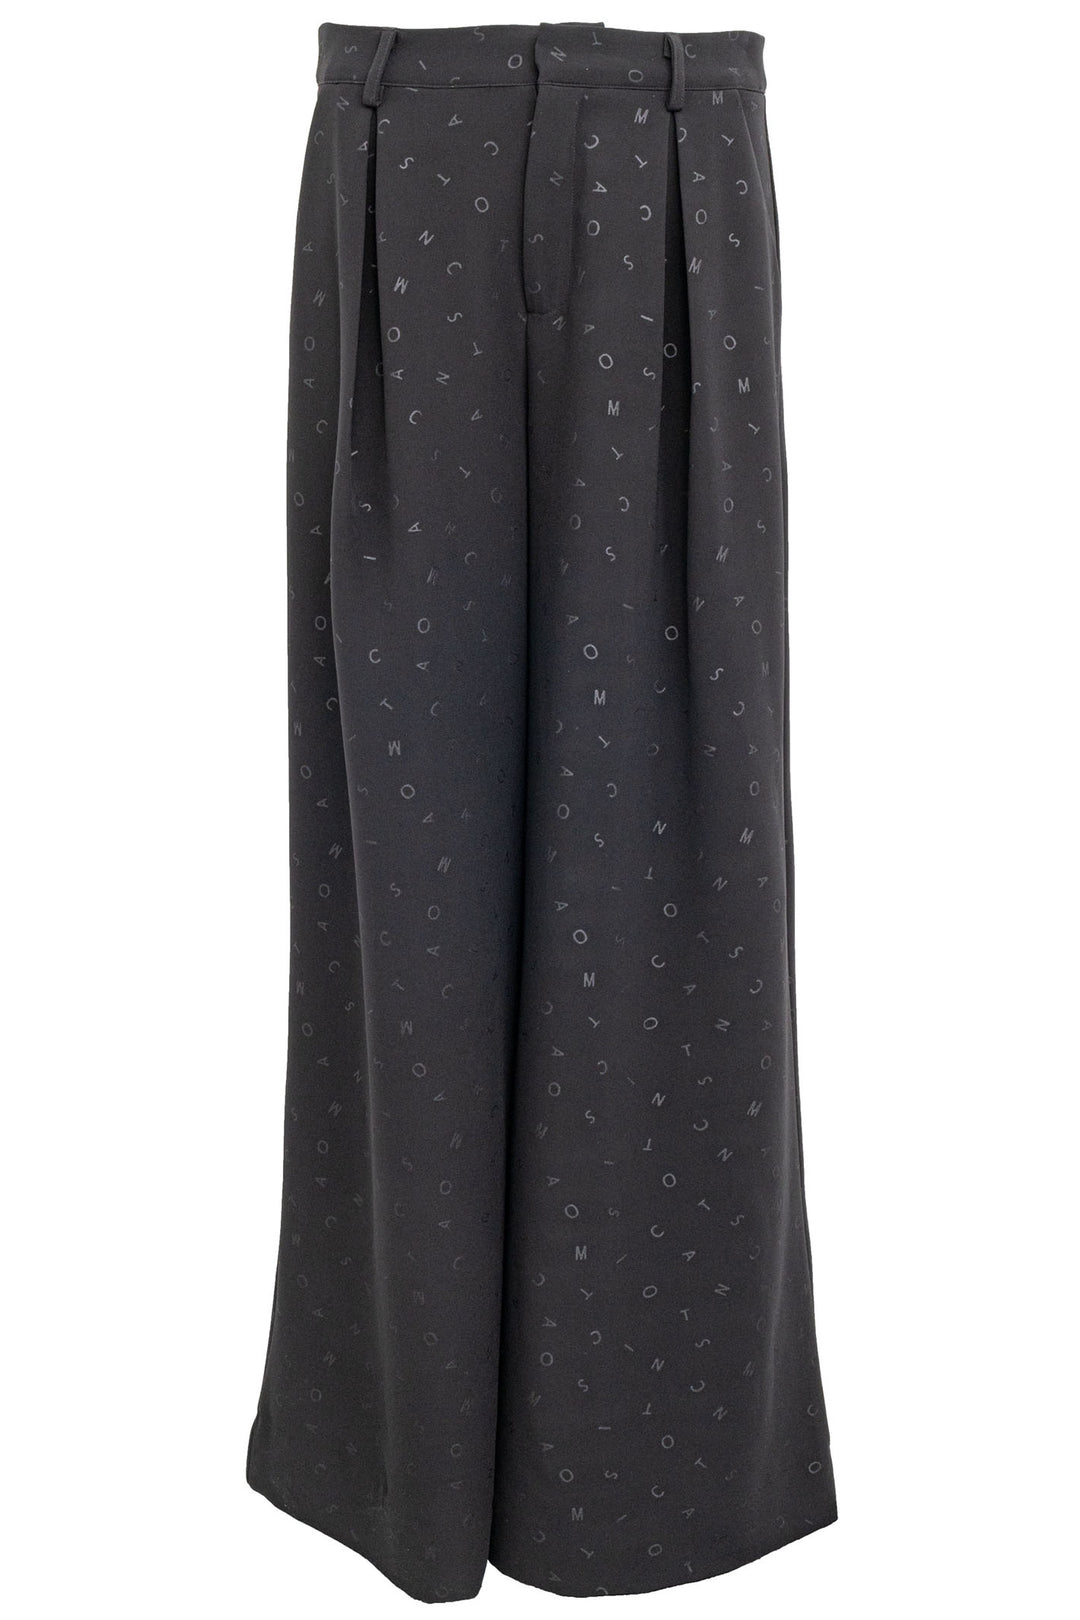 Costa Mani 2401407 Black Cimmie Trousers - Experience Boutique